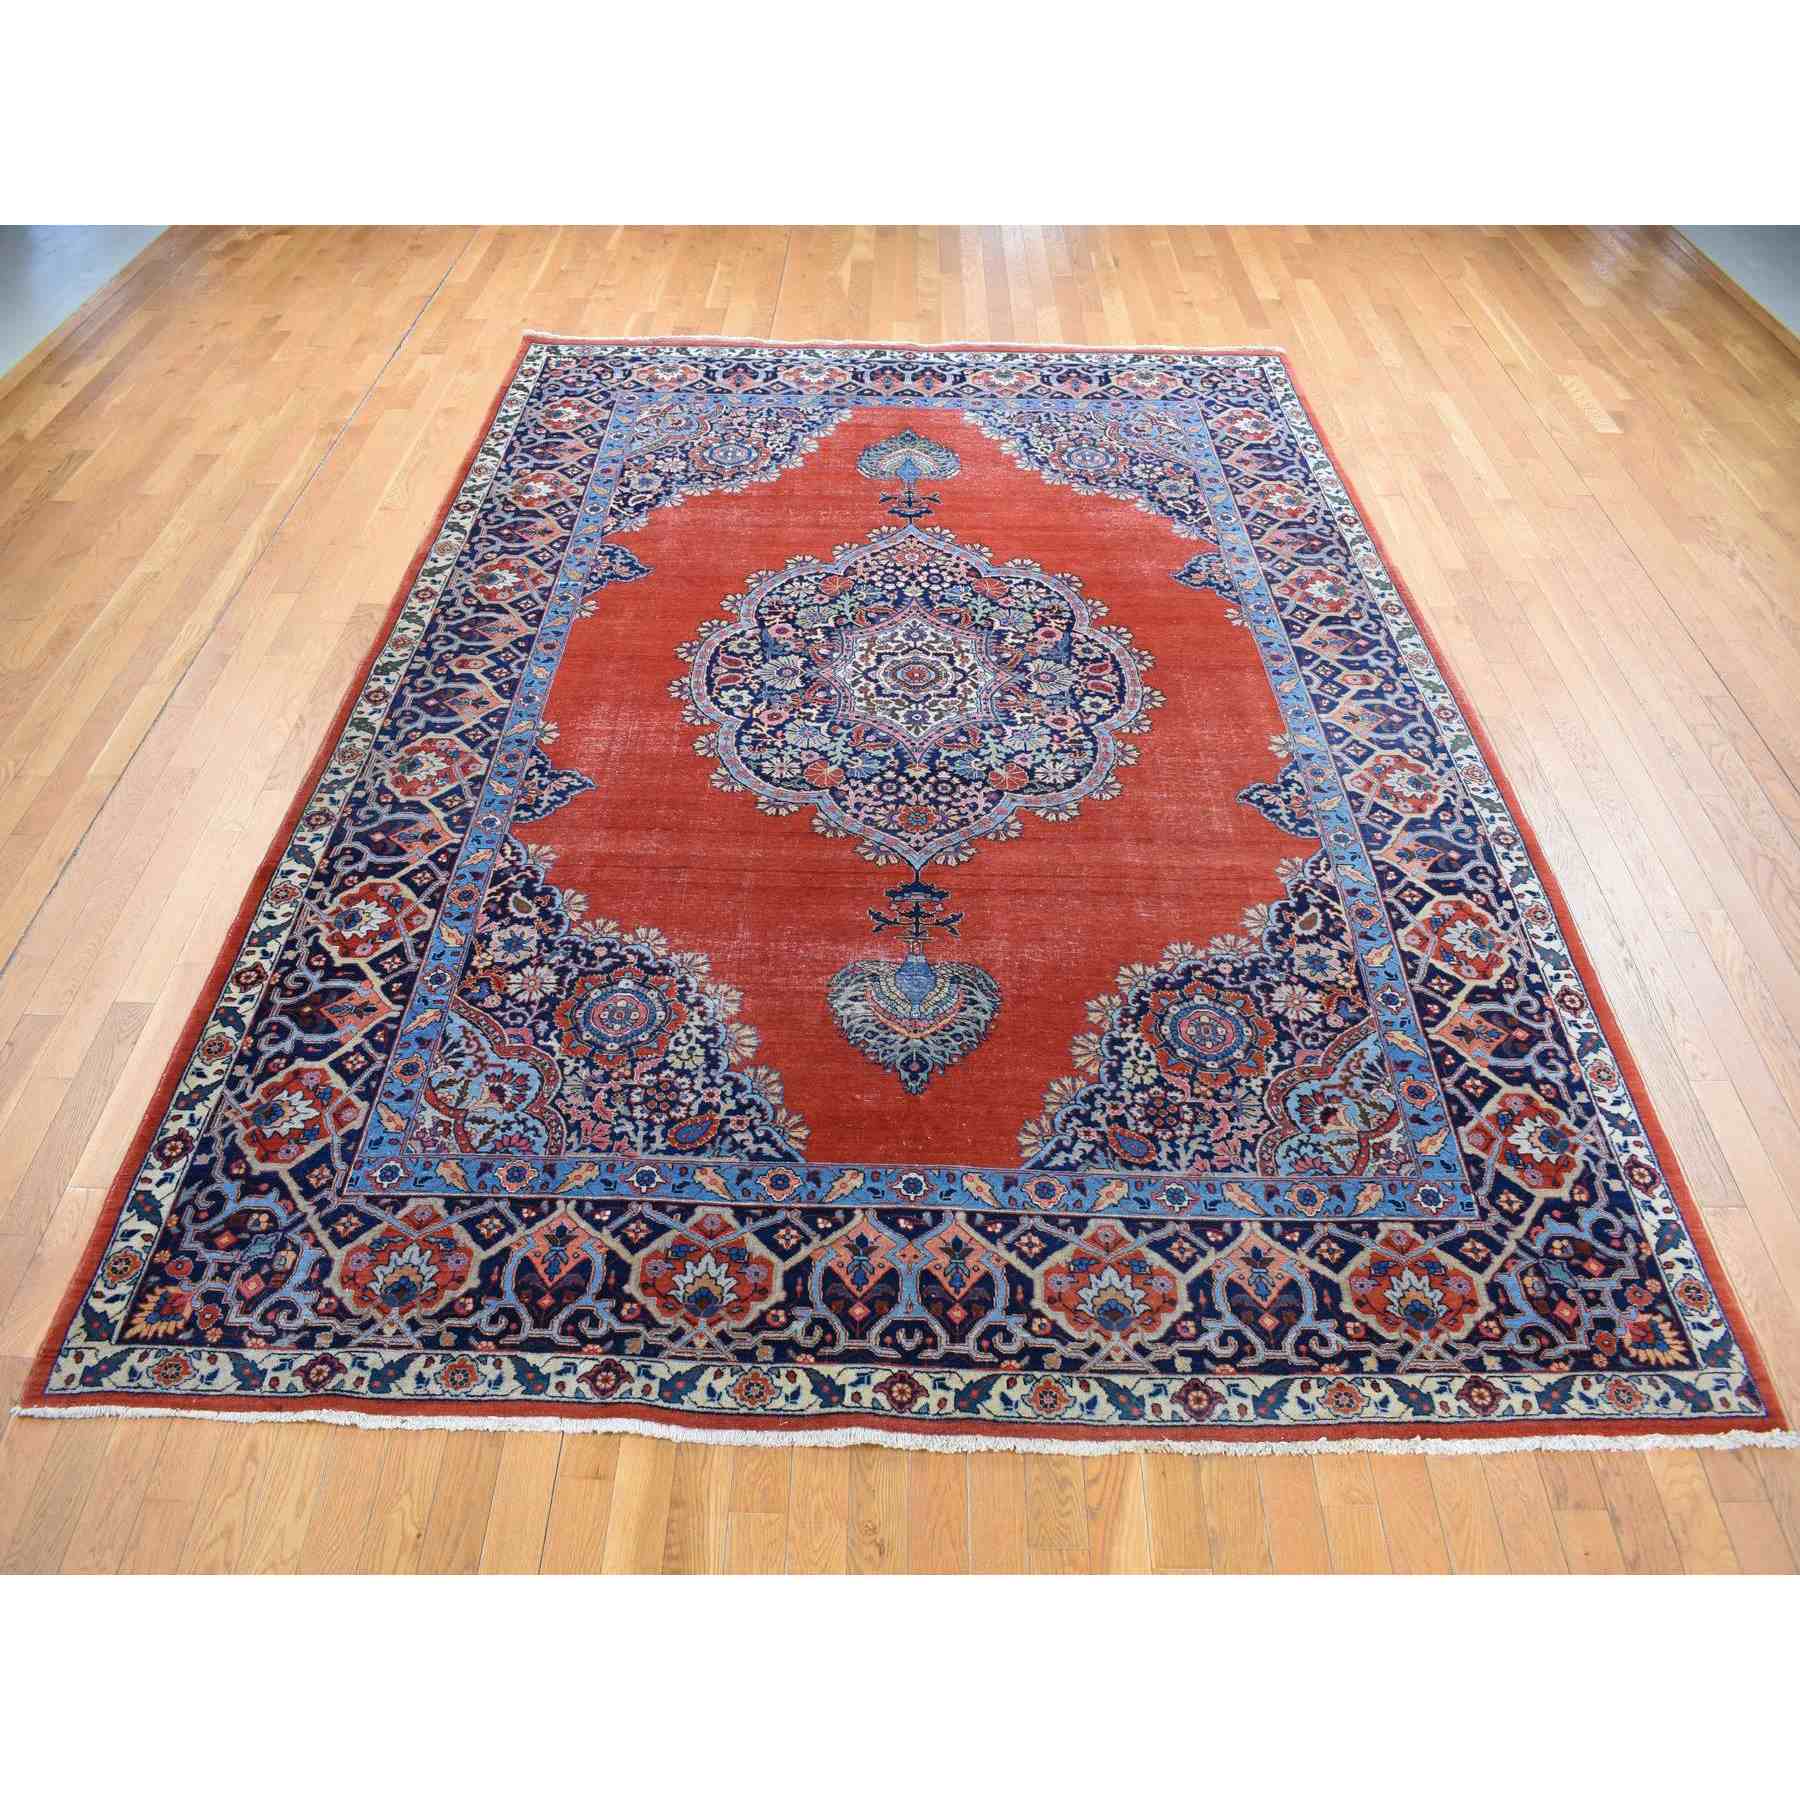 Antique-Hand-Knotted-Rug-403555